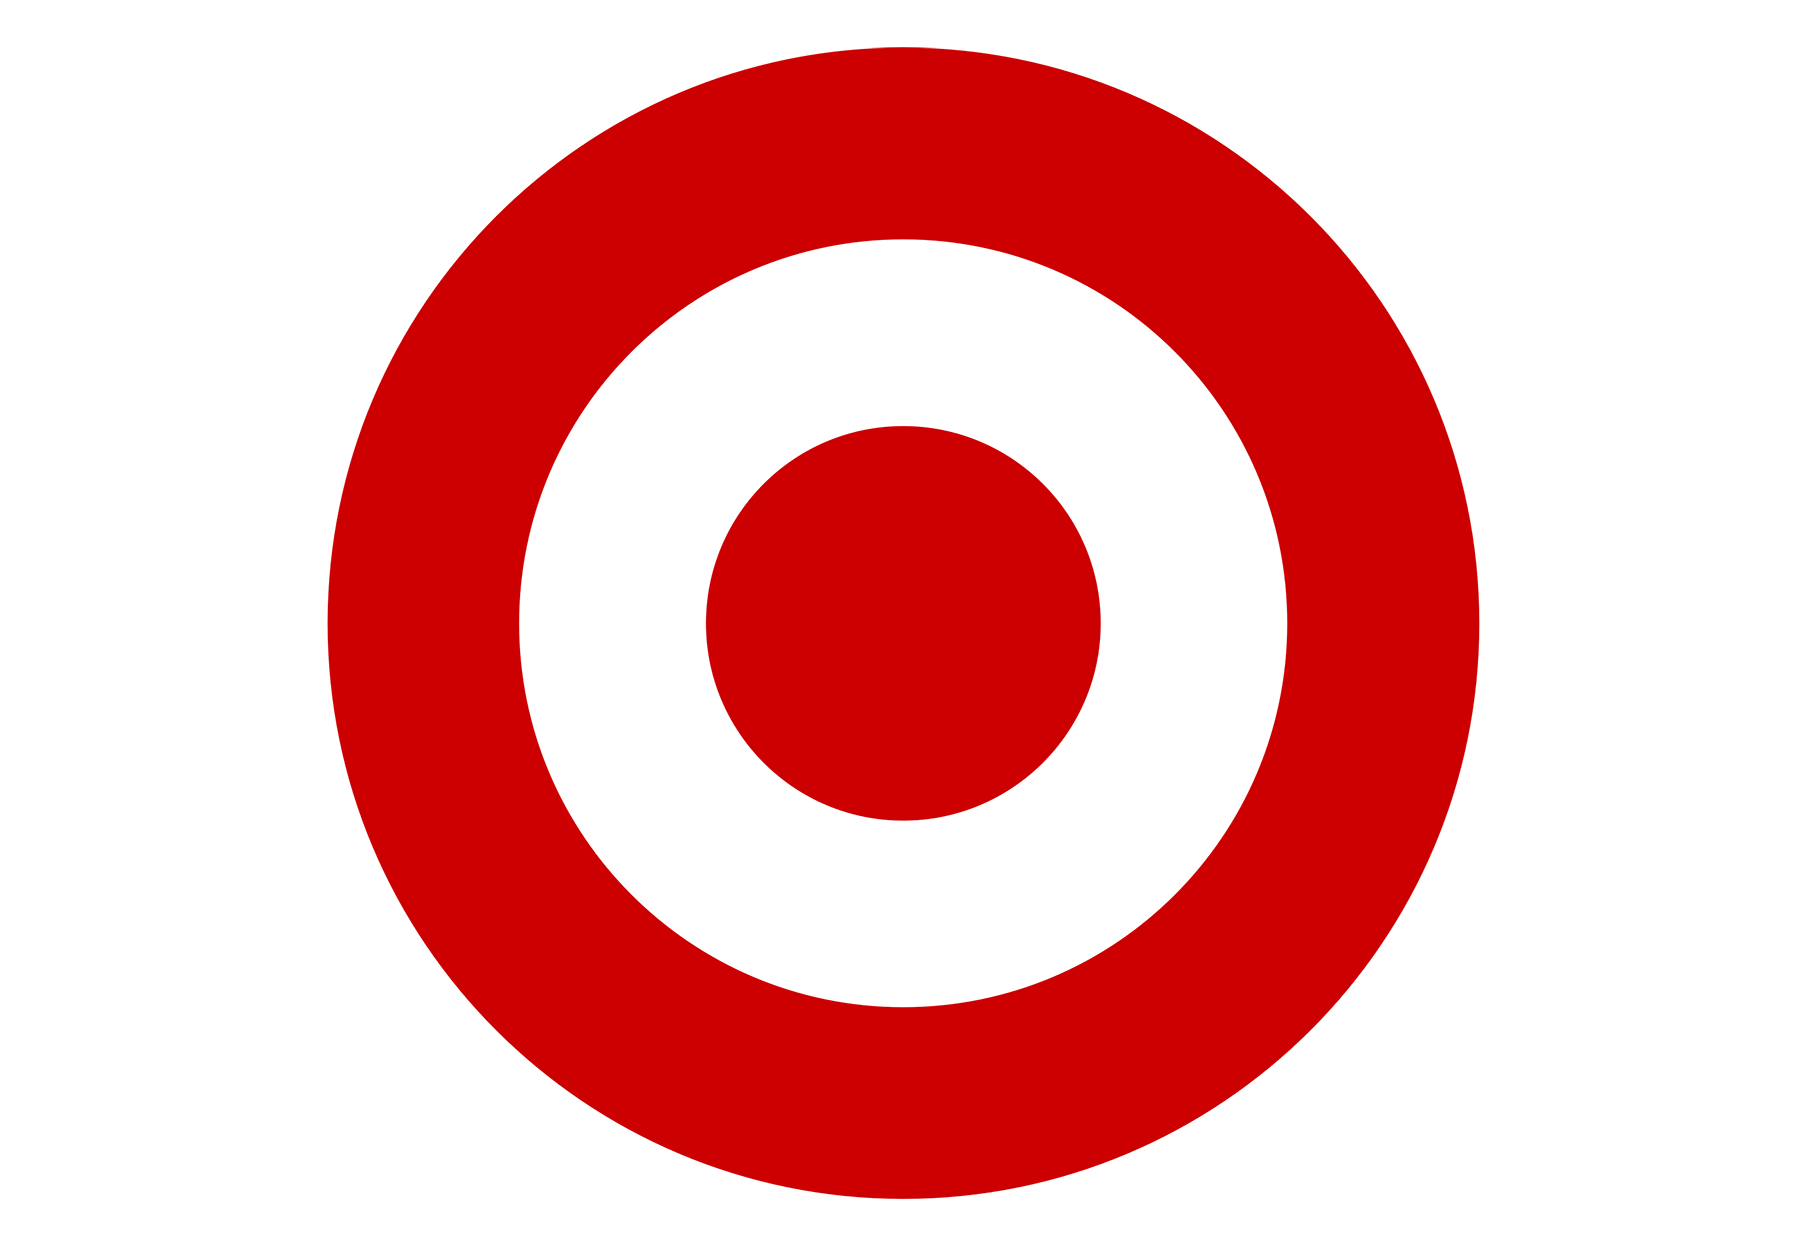 Red Circle Logo - Target Logo, Target Symbol, Meaning, History and Evolution